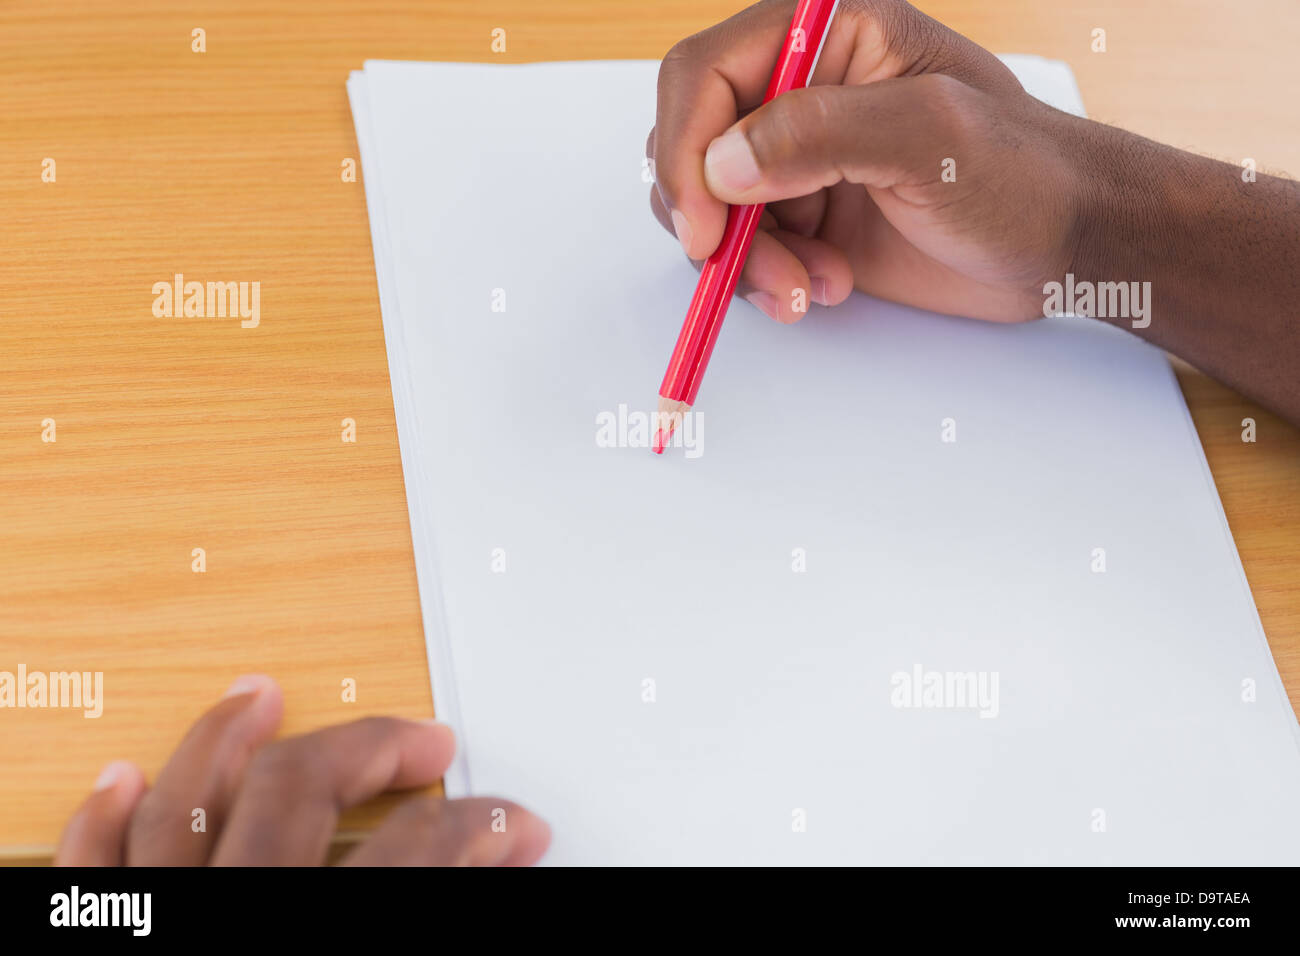 Man drawing with a red pencil Stock Photo